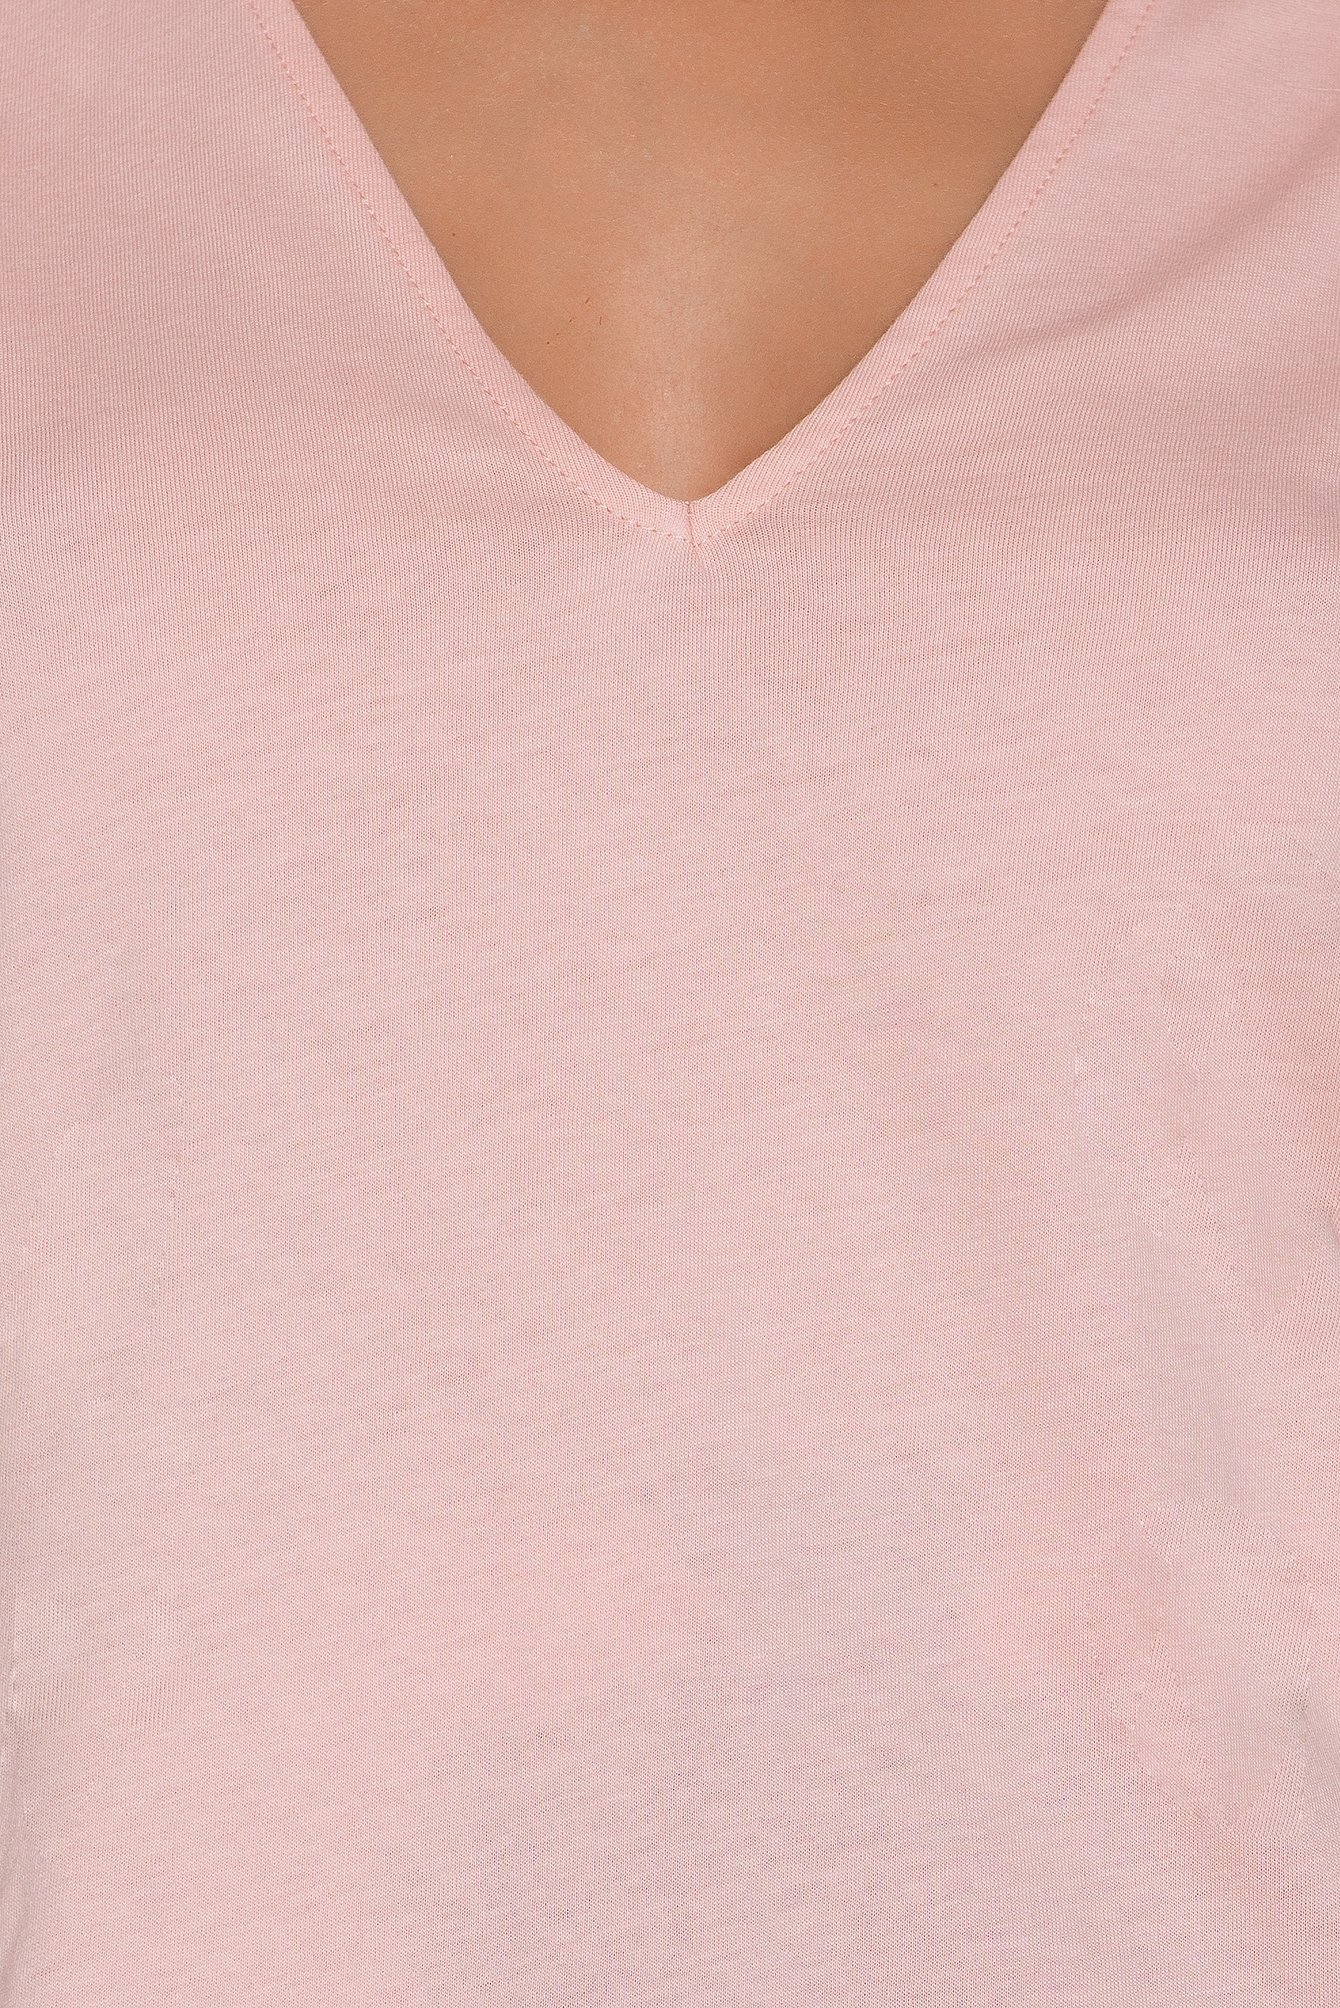 Light Pink V Cut Out Tee